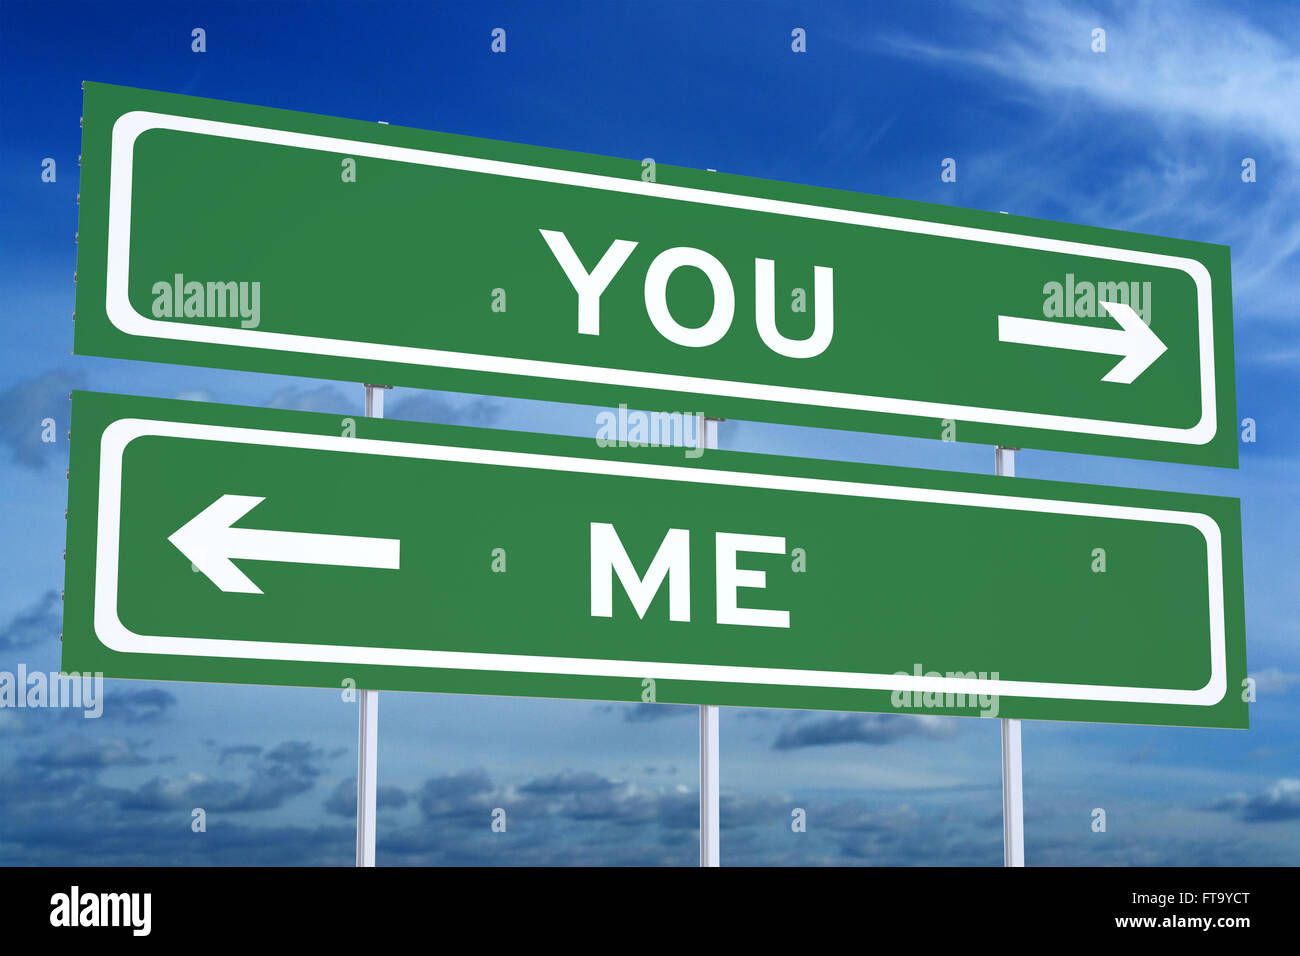 You or Me concept on the road signpost, 3D rendering Stock Photo